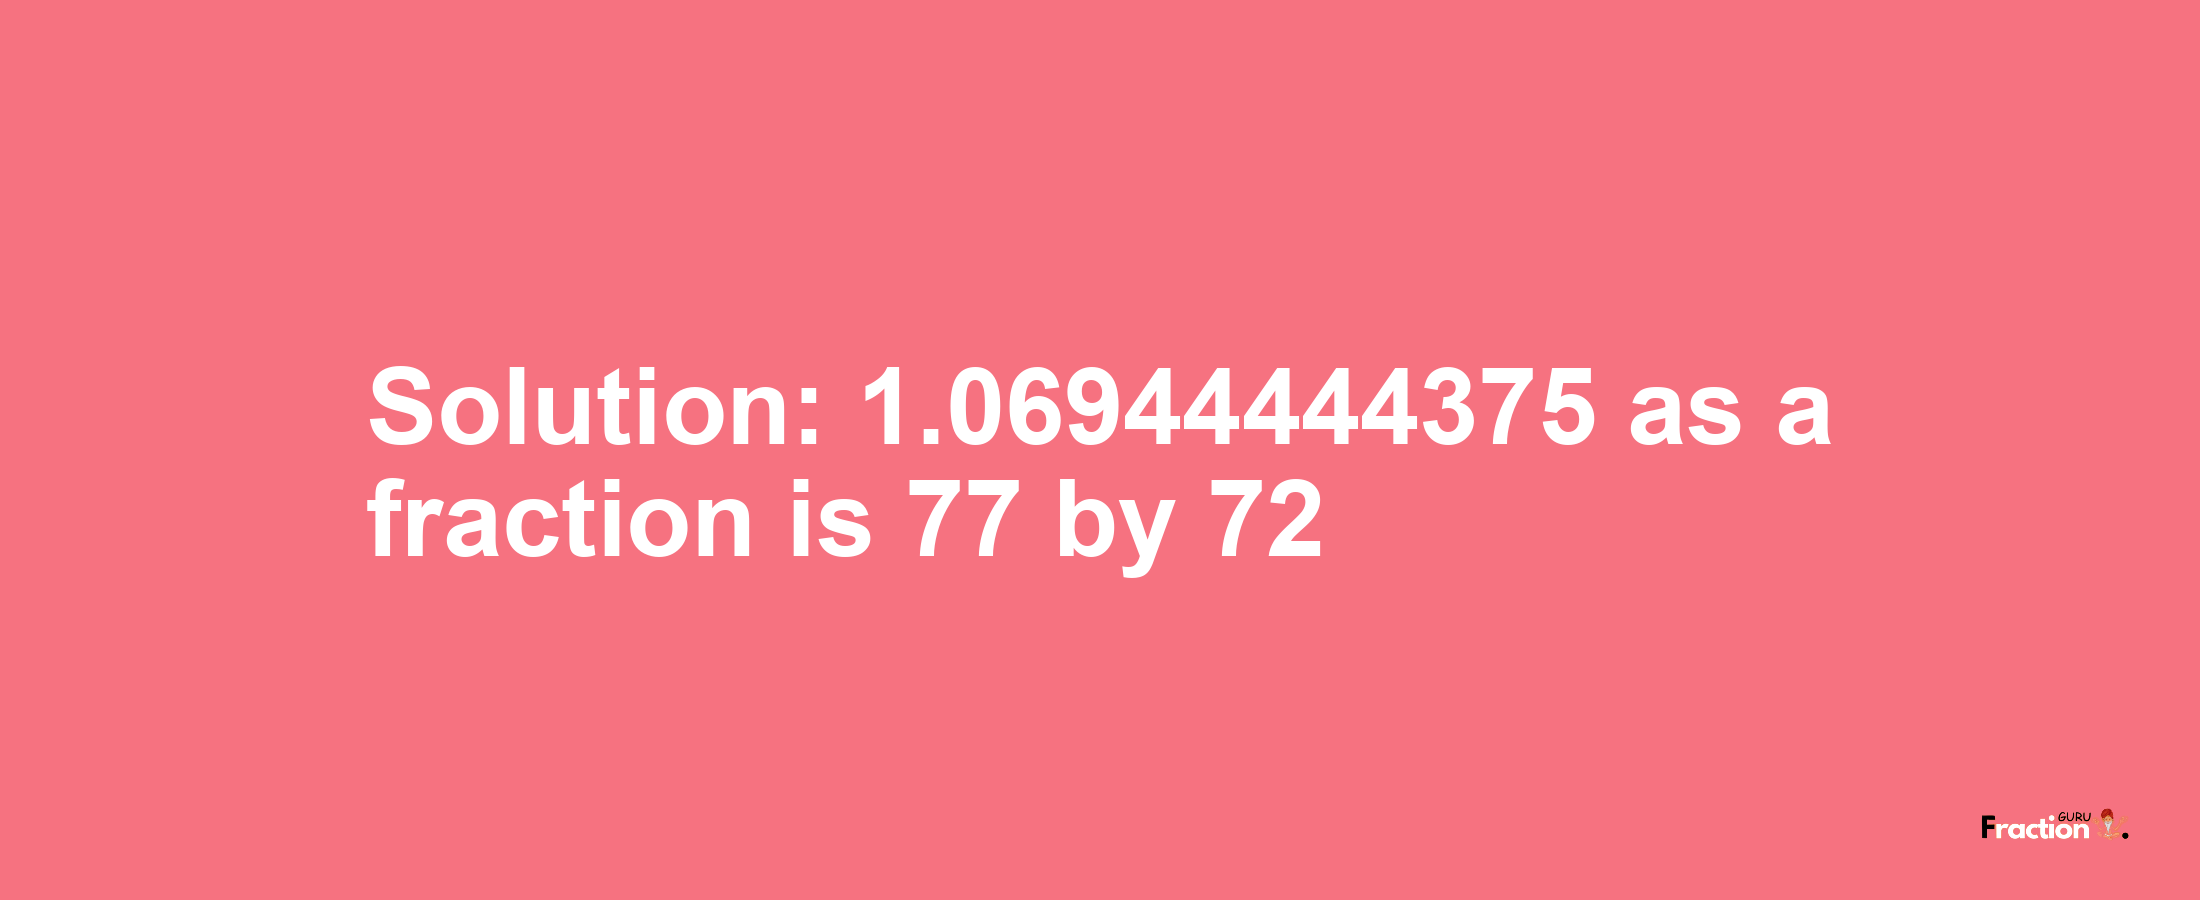 Solution:1.06944444375 as a fraction is 77/72